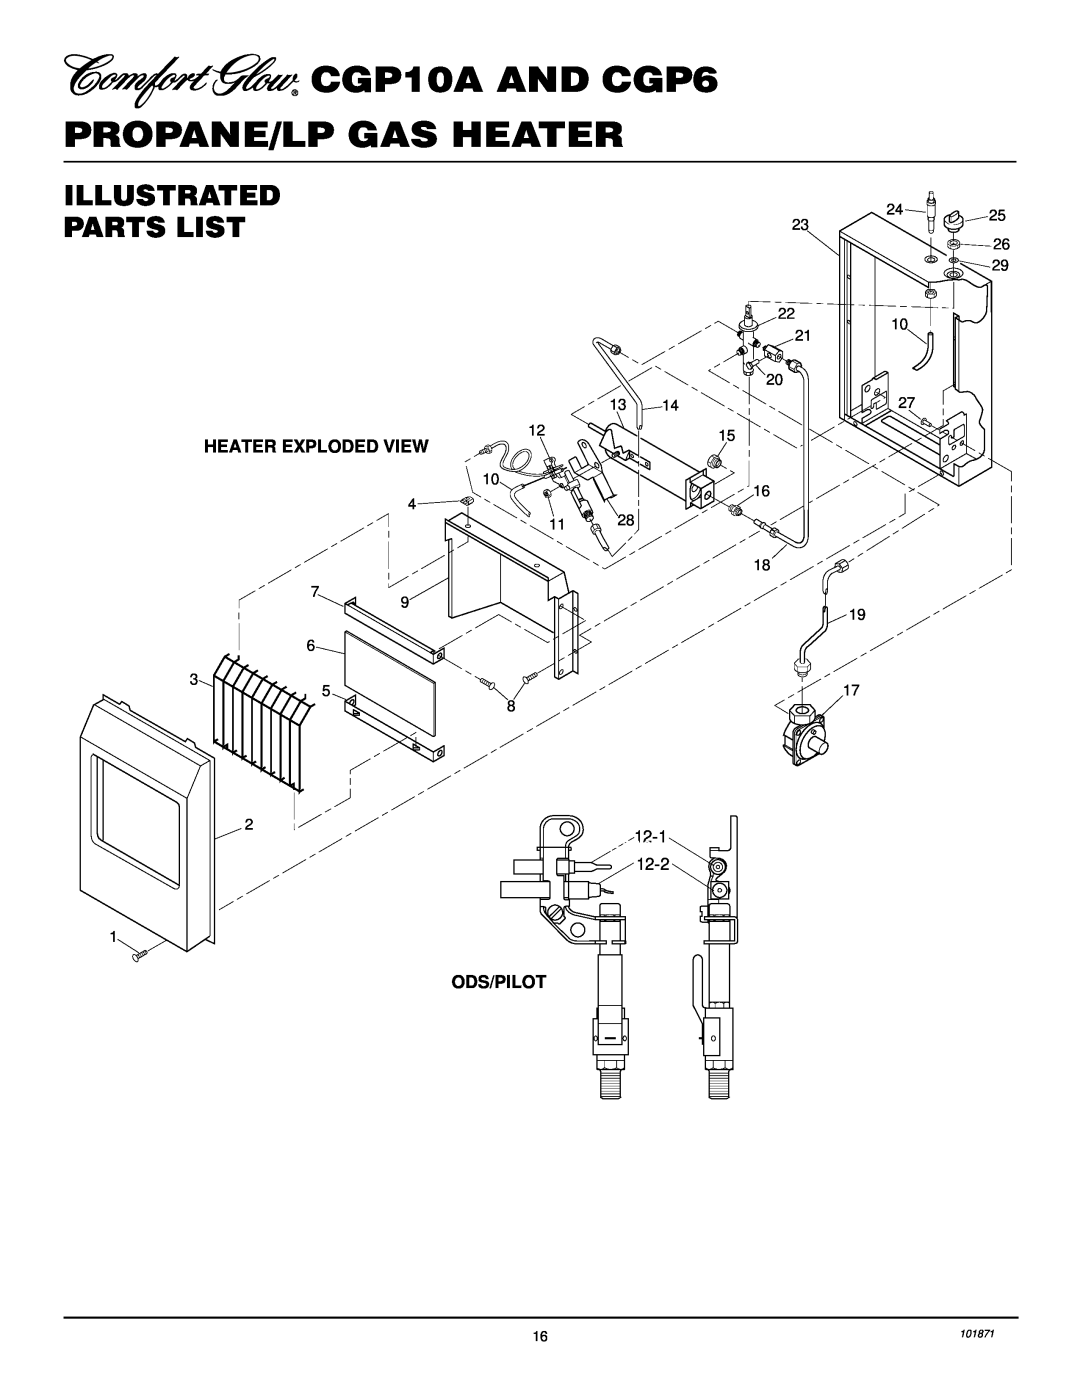 Desa Illustrated Parts List, CGP10A AND CGP6 PROPANE/LP GAS HEATER, Heater Exploded View, GRHpv014C, Ods/Pilot 